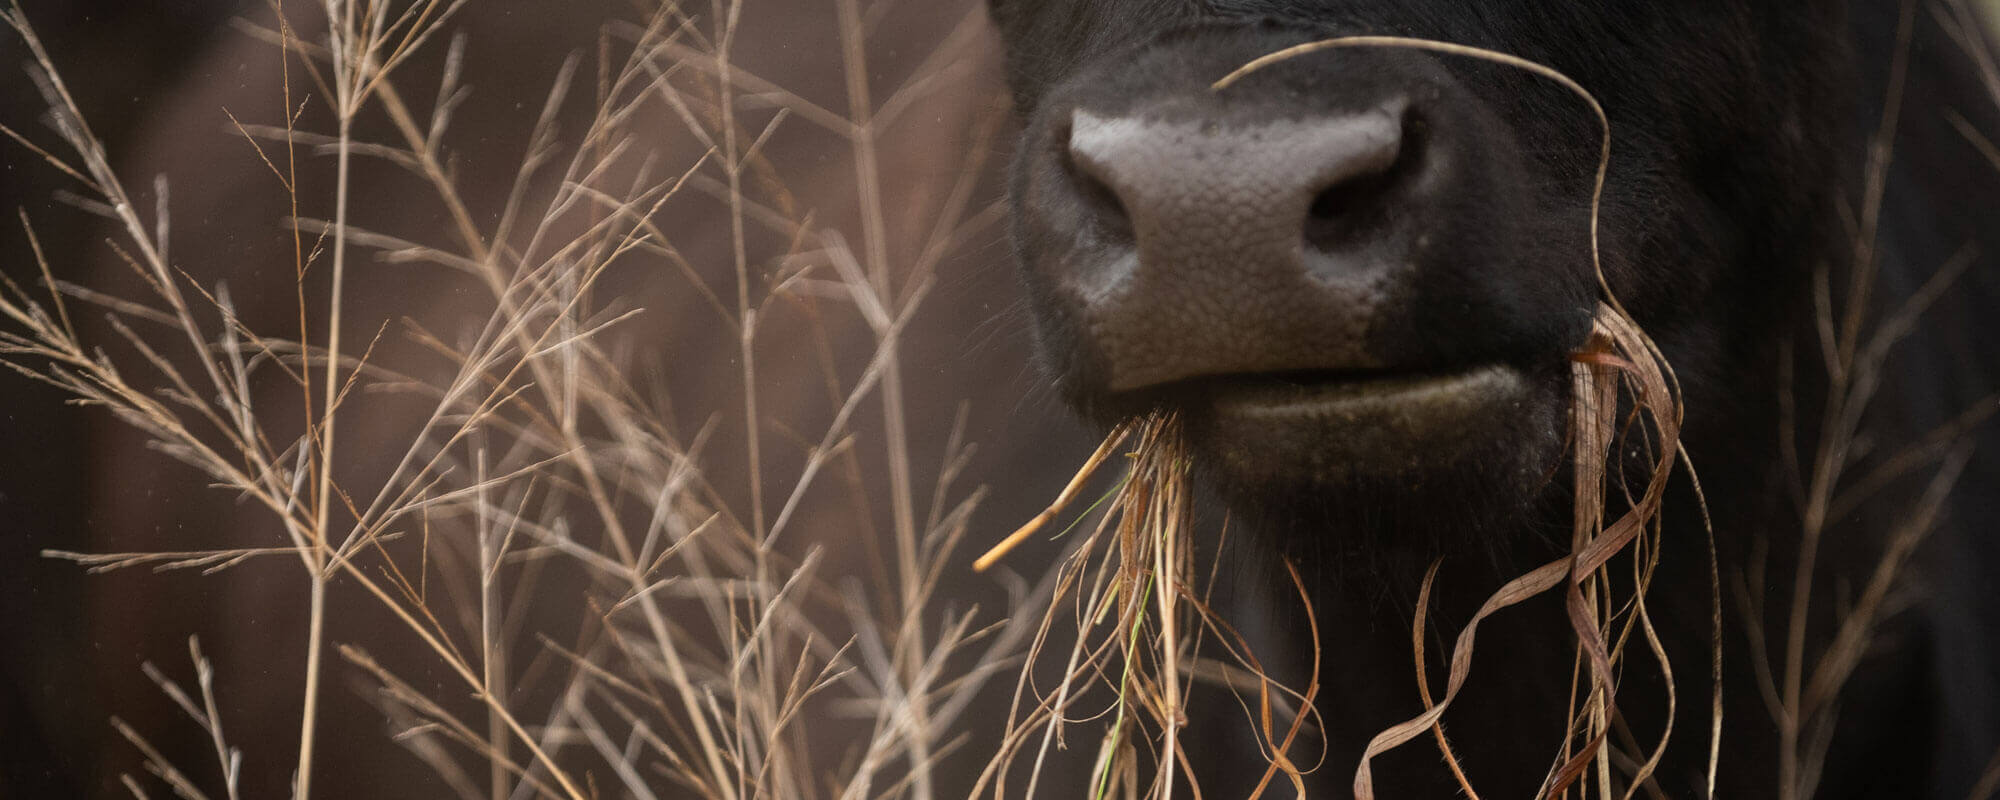 Close up image of cow grazing dormant season forage.